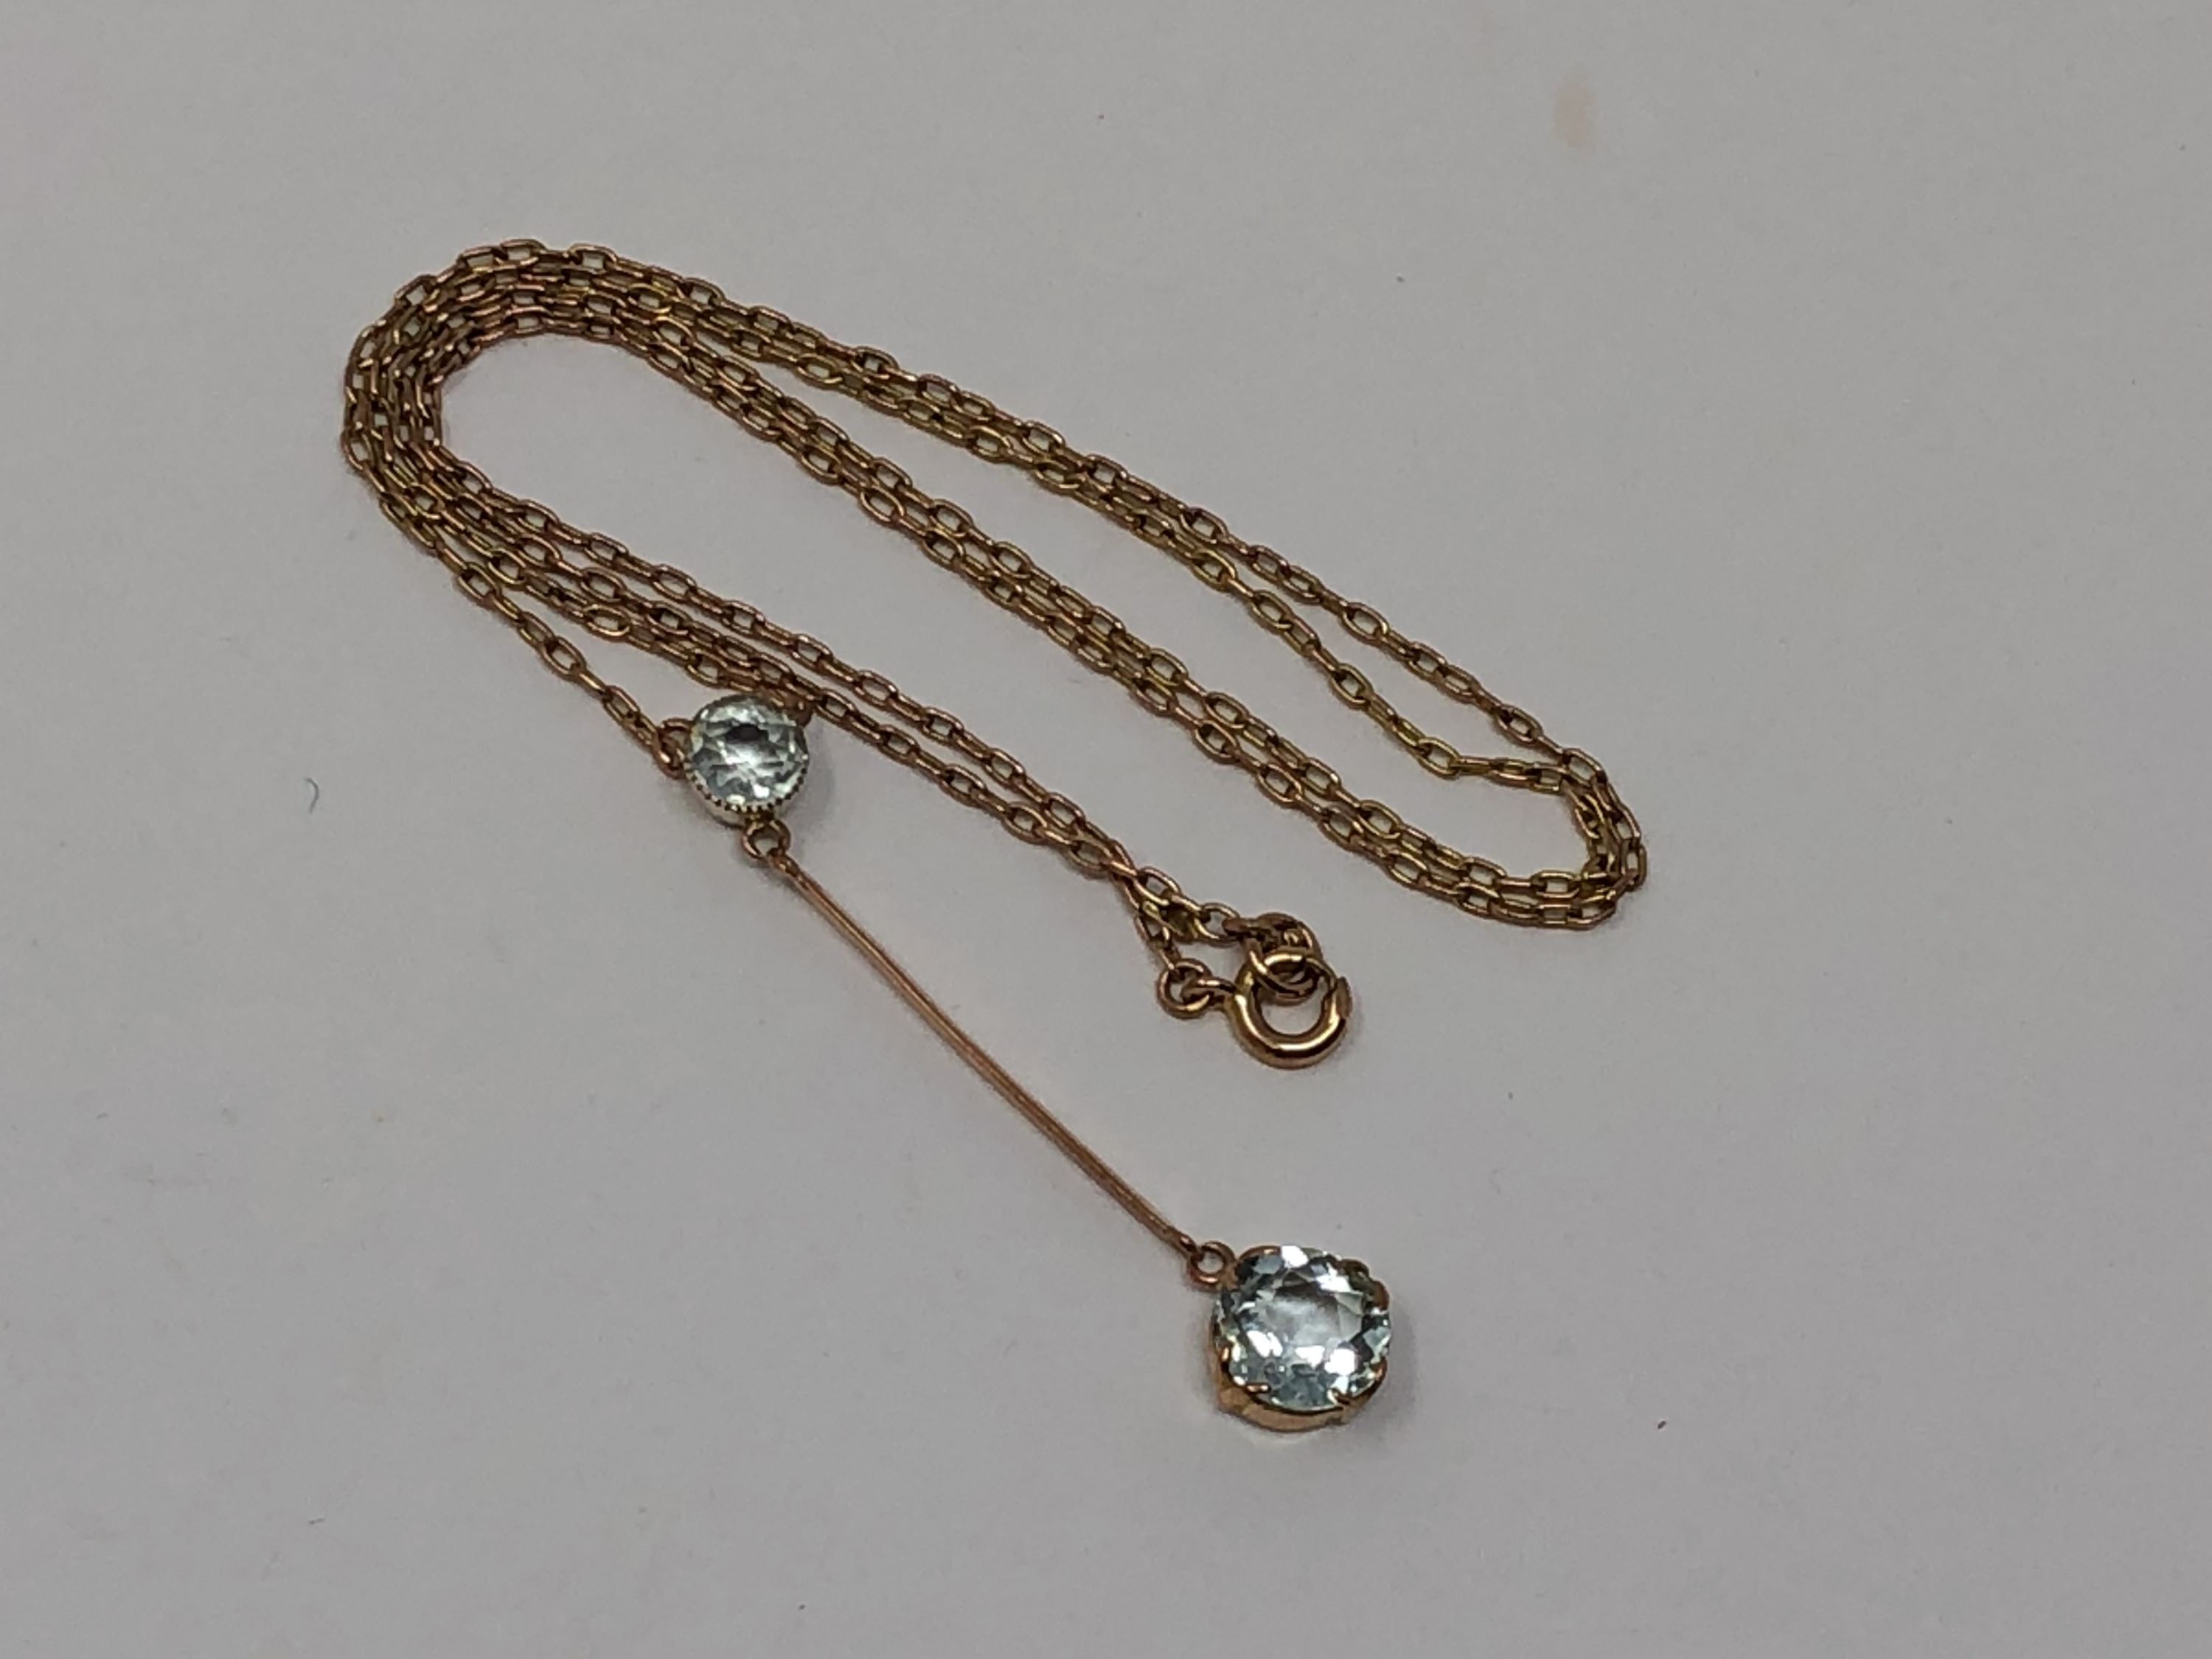 An antique gold two stone aquamarine pendant on gold chain